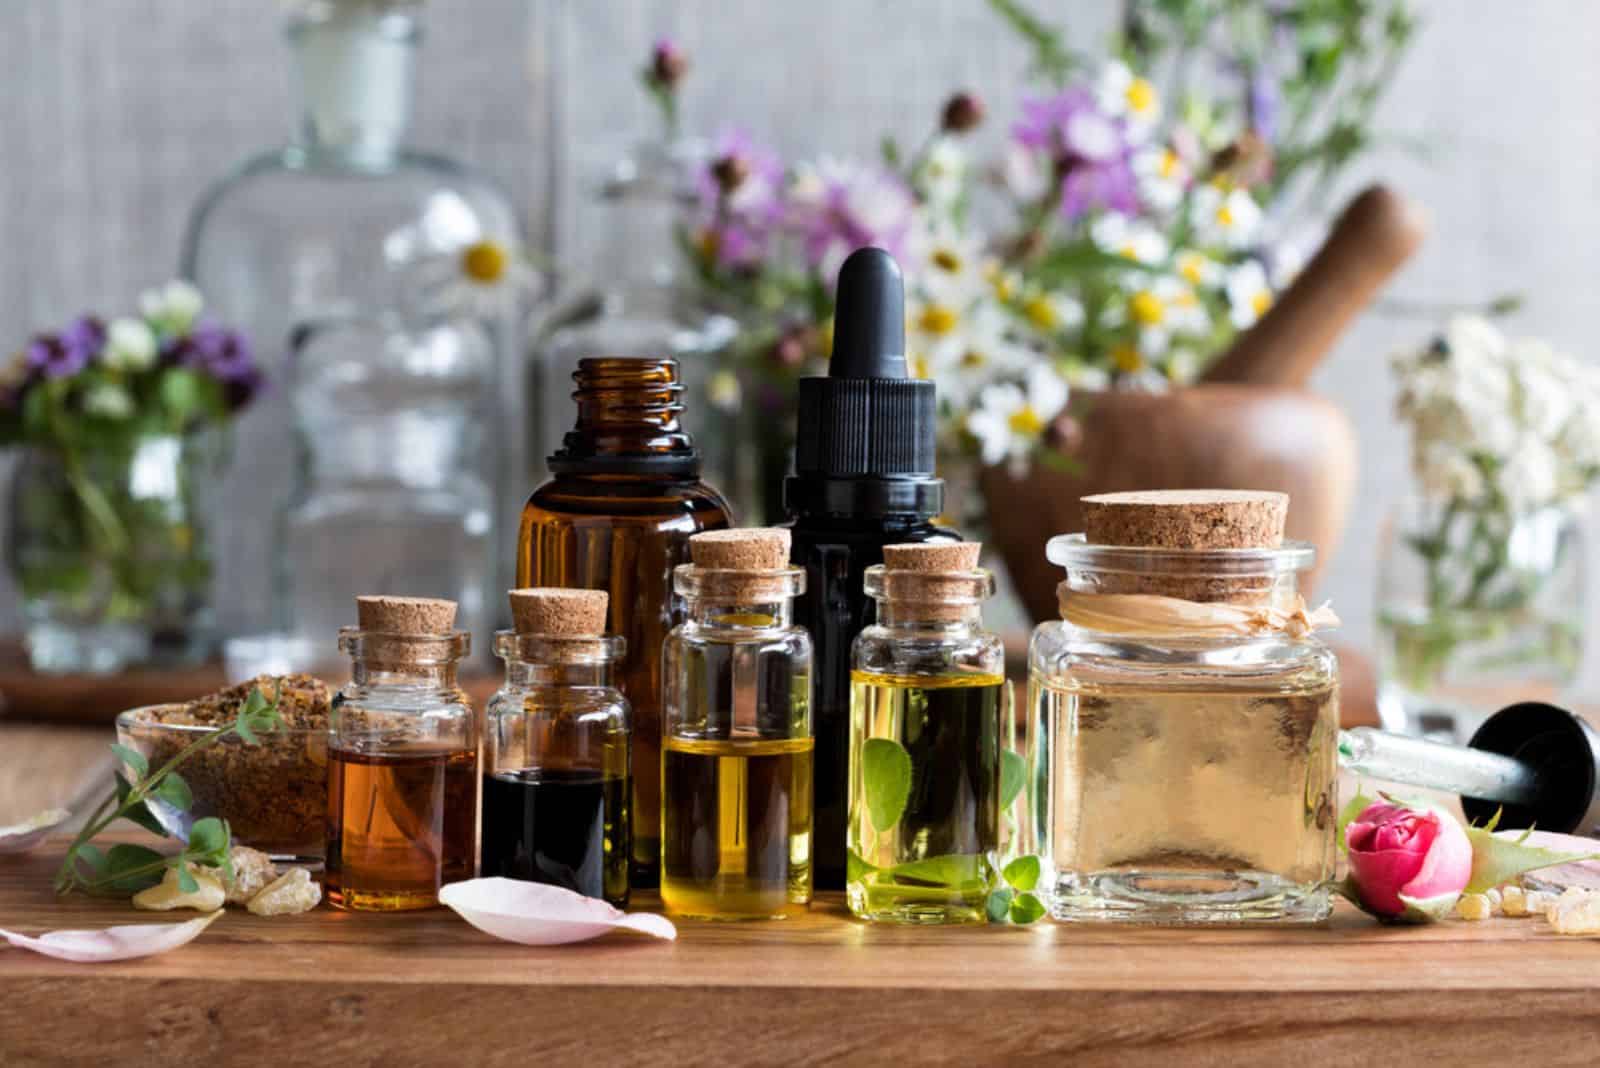 Selection of essential oils, with herbs and flowers